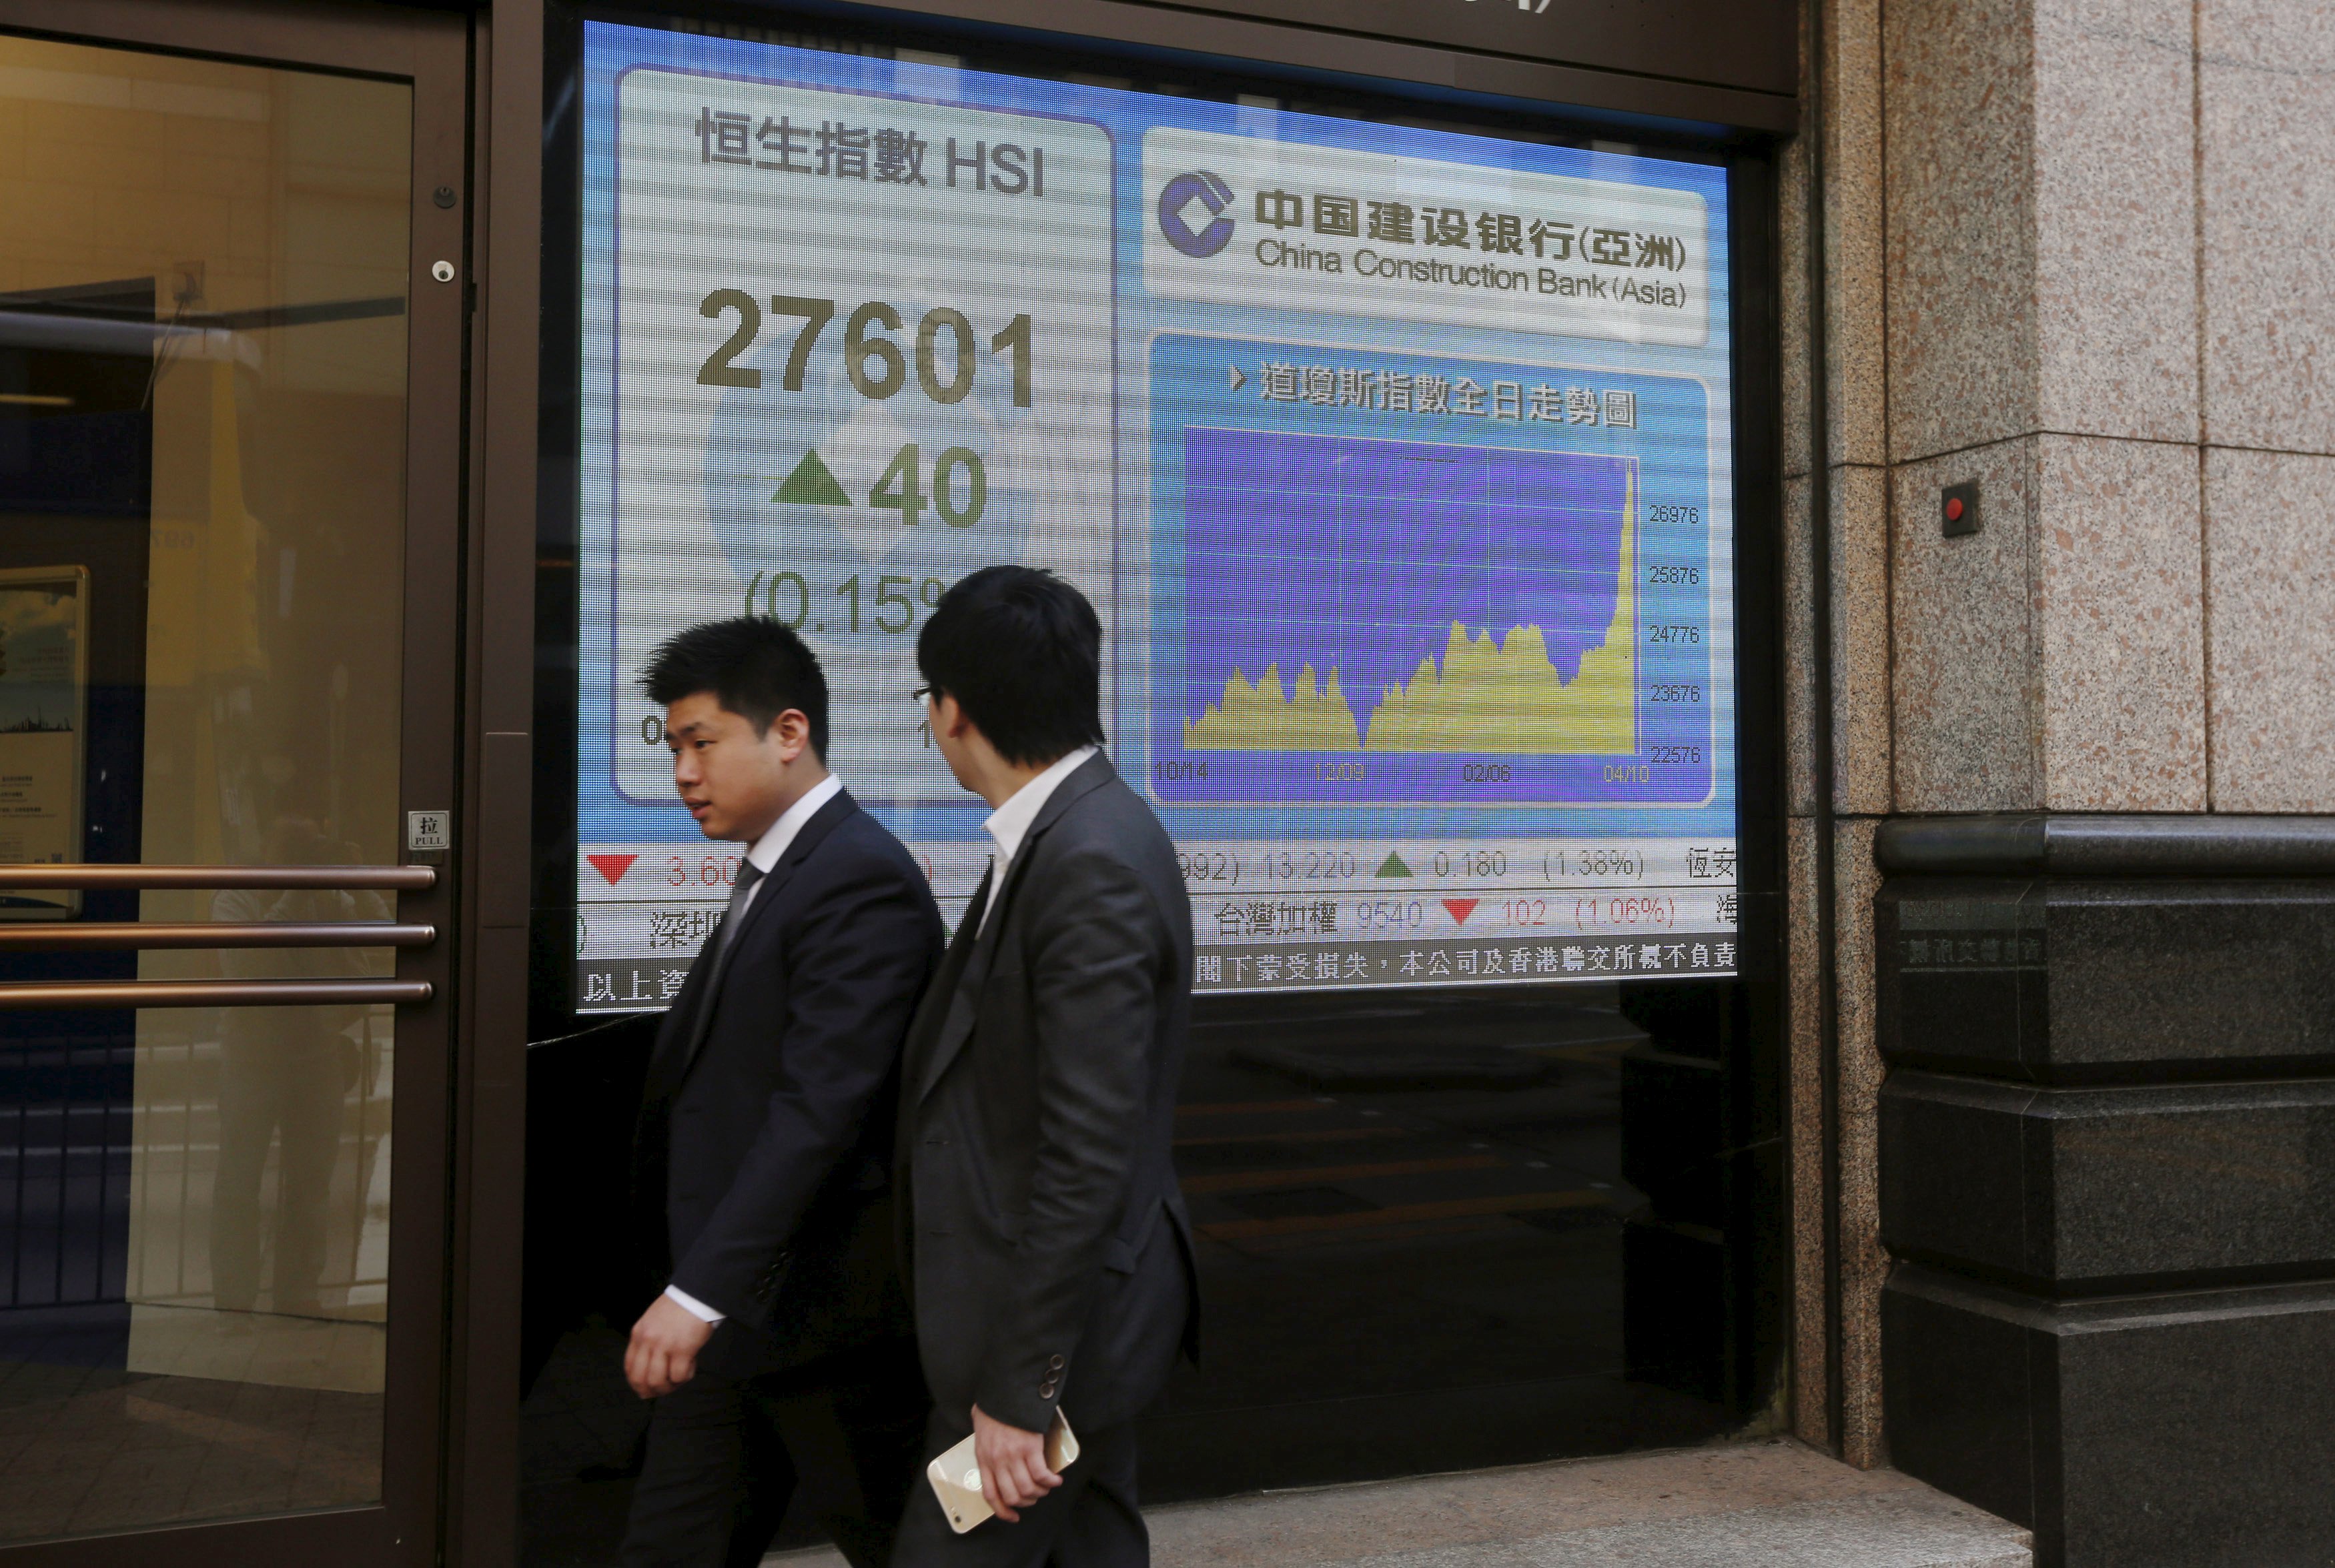 Businessmen walk past an electronic board showing the Hang Seng index which surged at the start on Monday to hit fresh highs along with the Shanghai index in China. Photo: Reuters